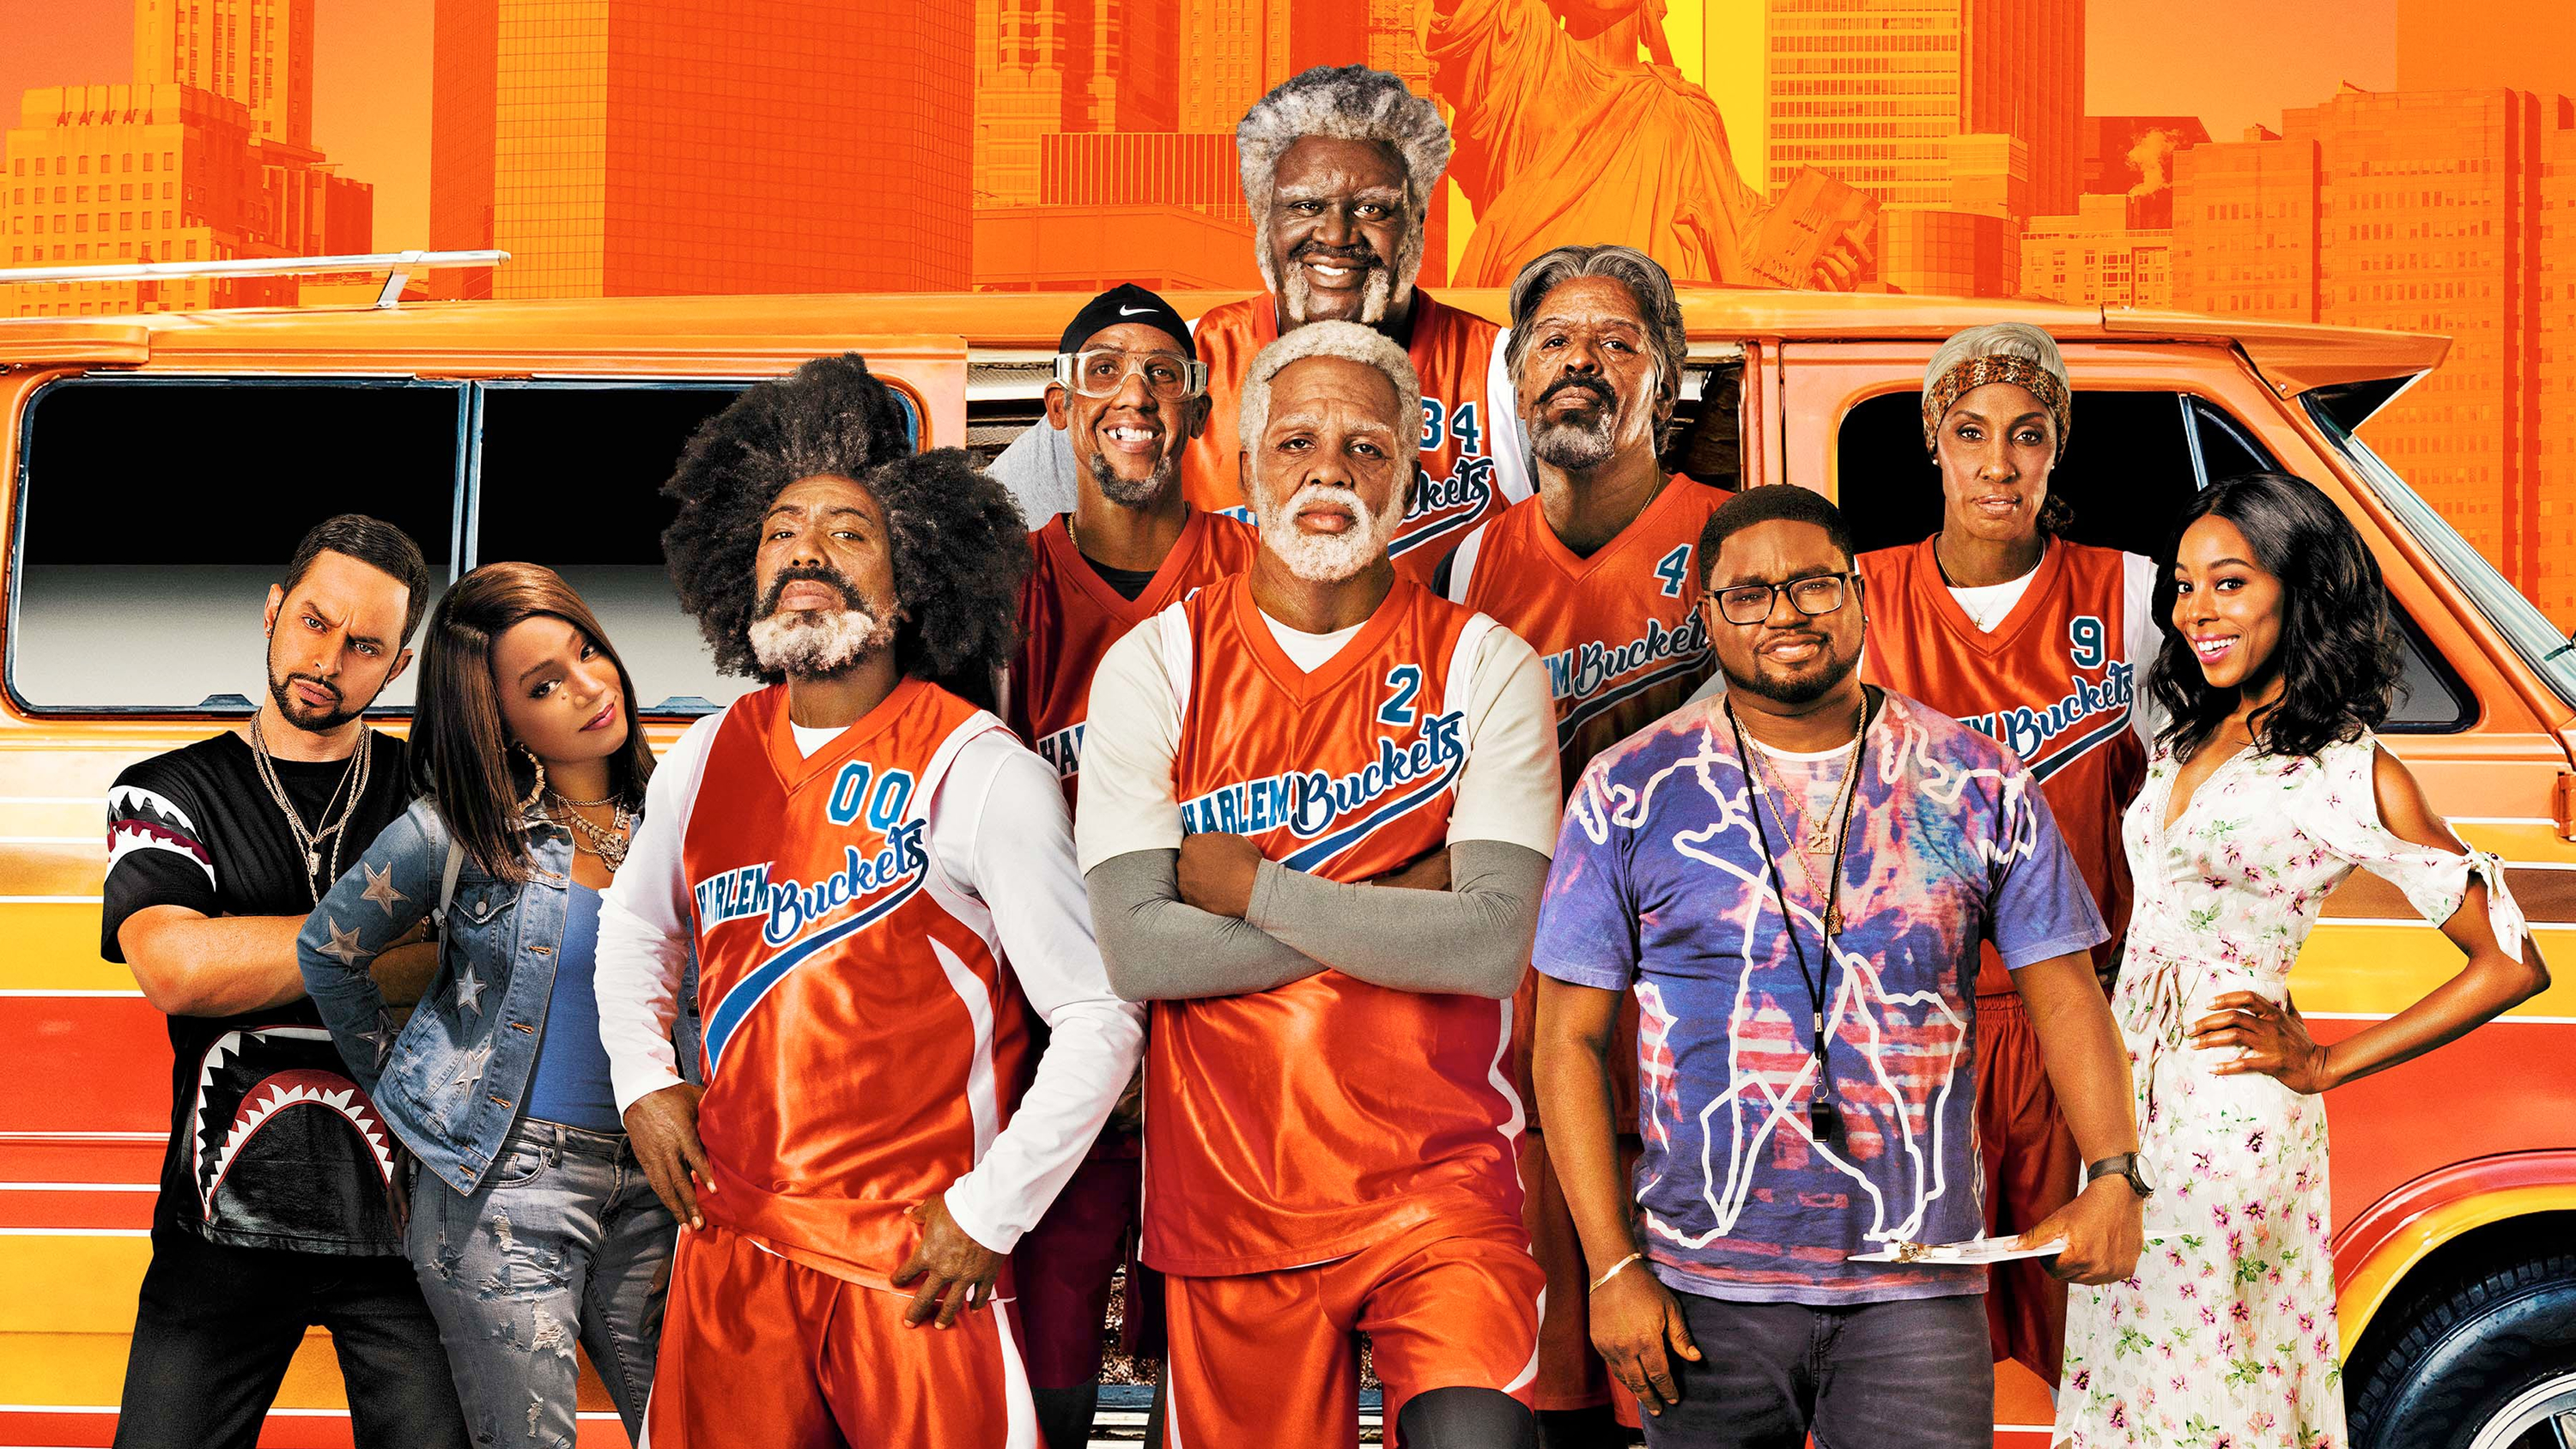 uncle drew wallpaper,social group,youth,event,community,team